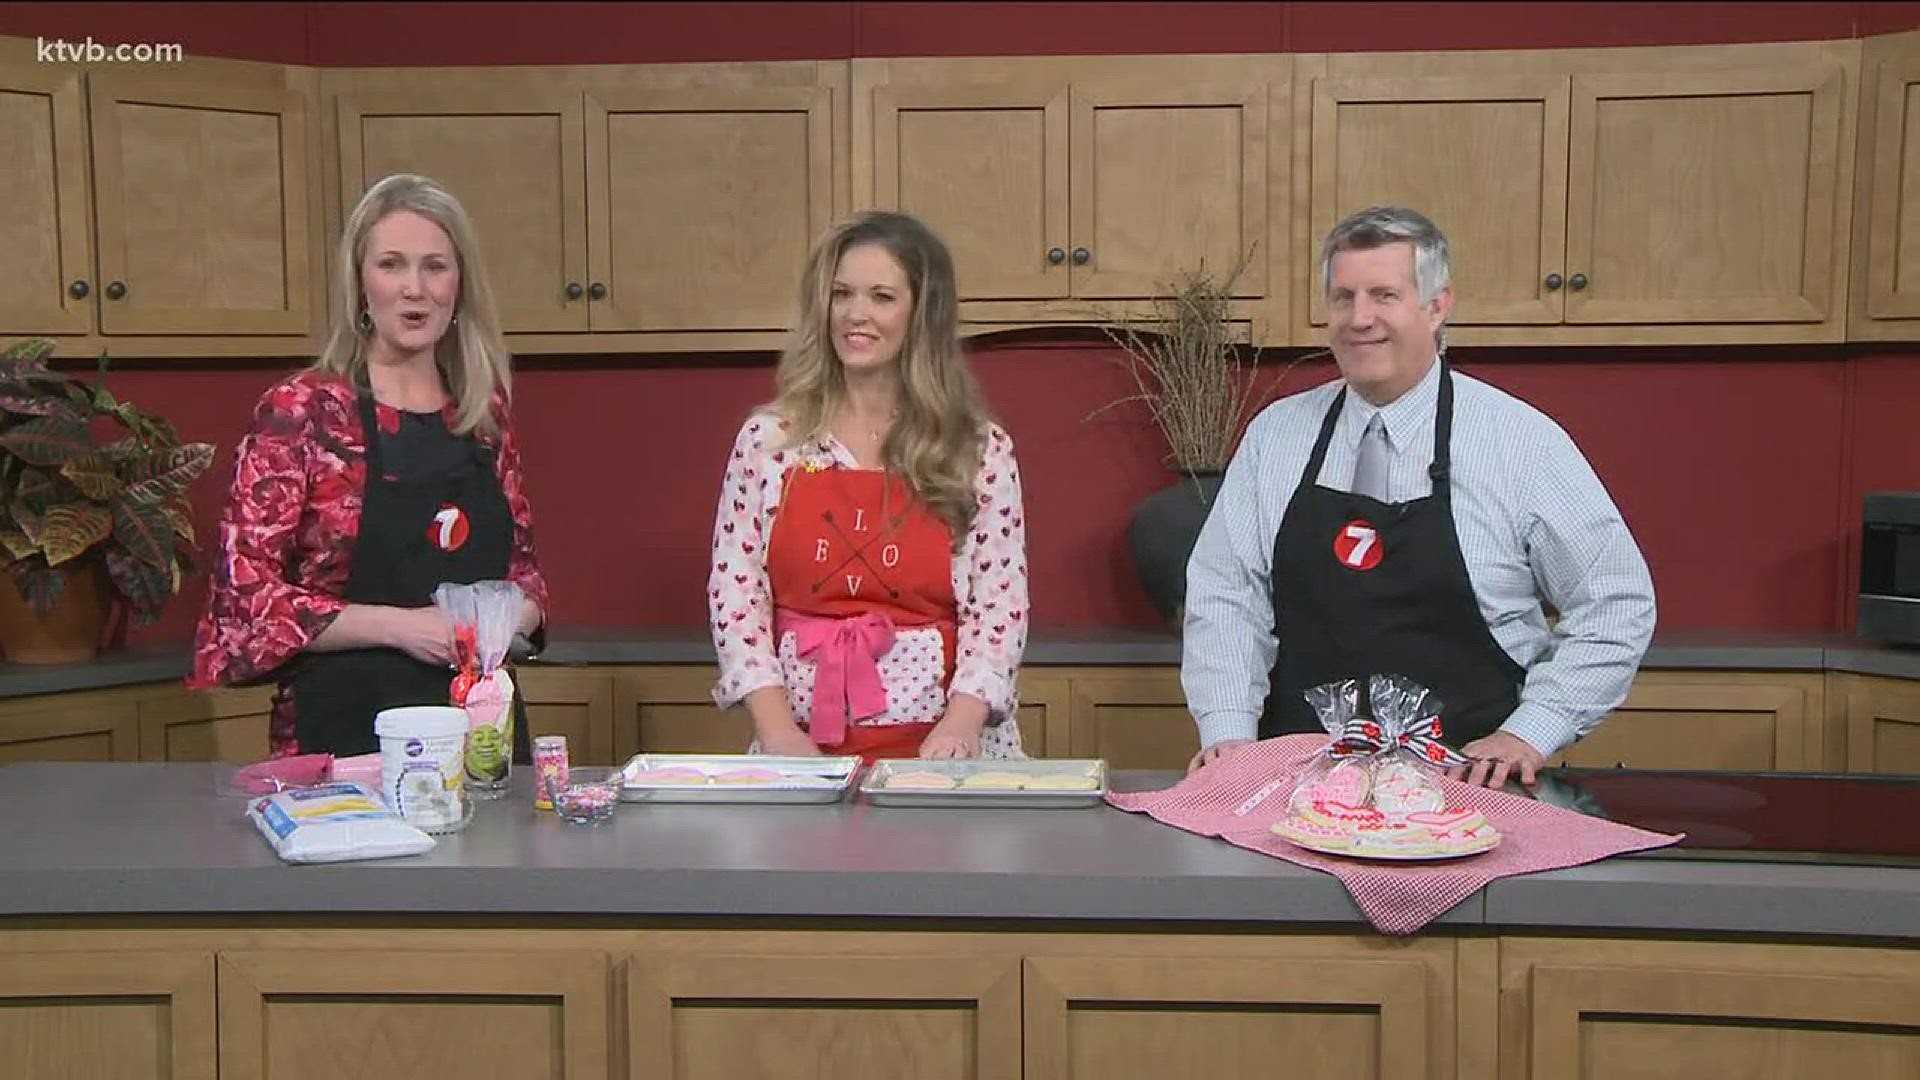 Cake and cookie baker Carrie Paternoster shows us some Valentine's Day cookie decorating ideas.